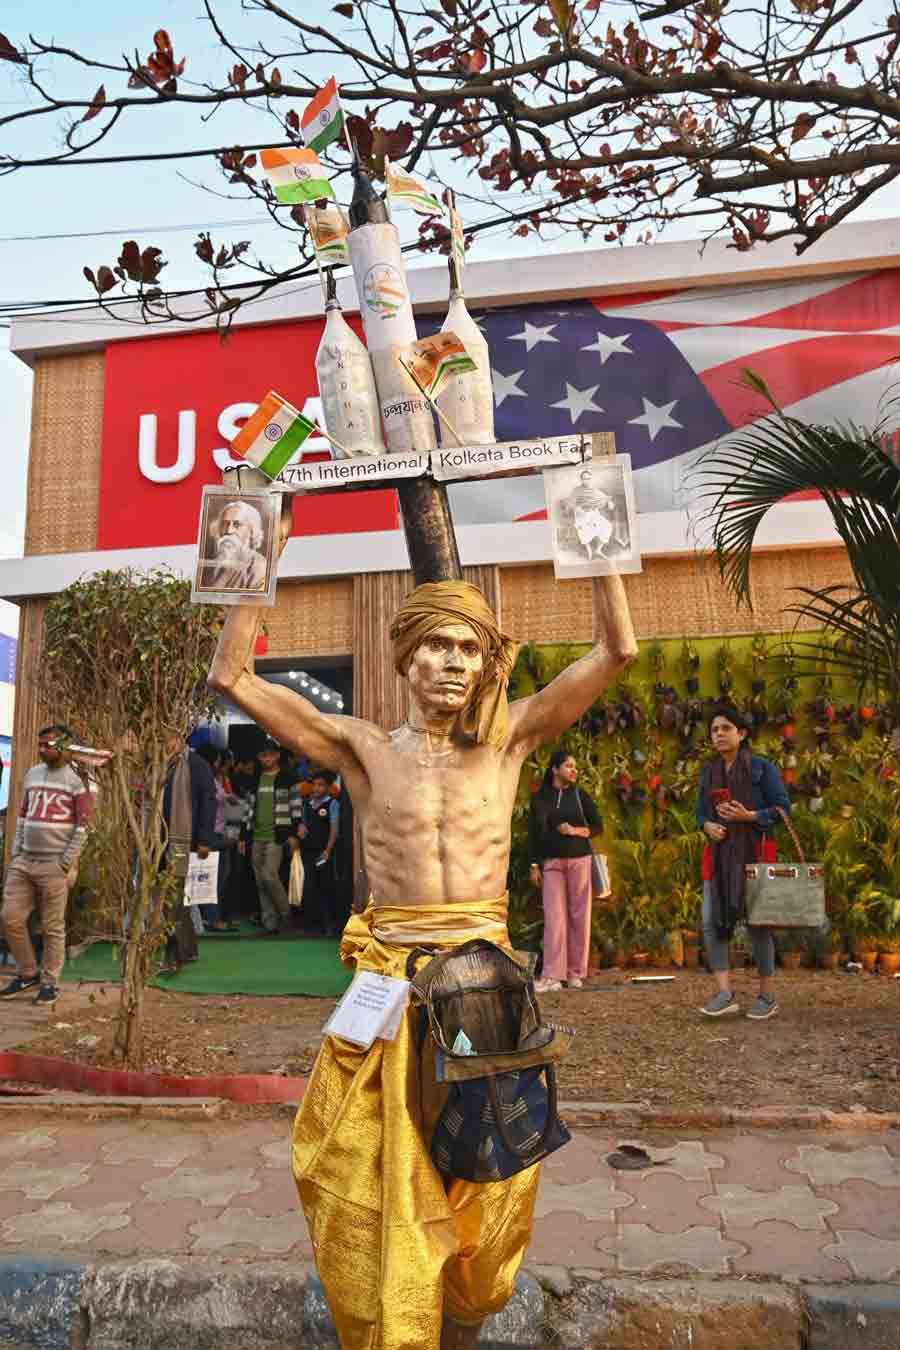 Many people find a way of earning at the Book Fair by showcasing their talents. In picture, a man poses as a statue lifting up a replica of the Chandrayaan